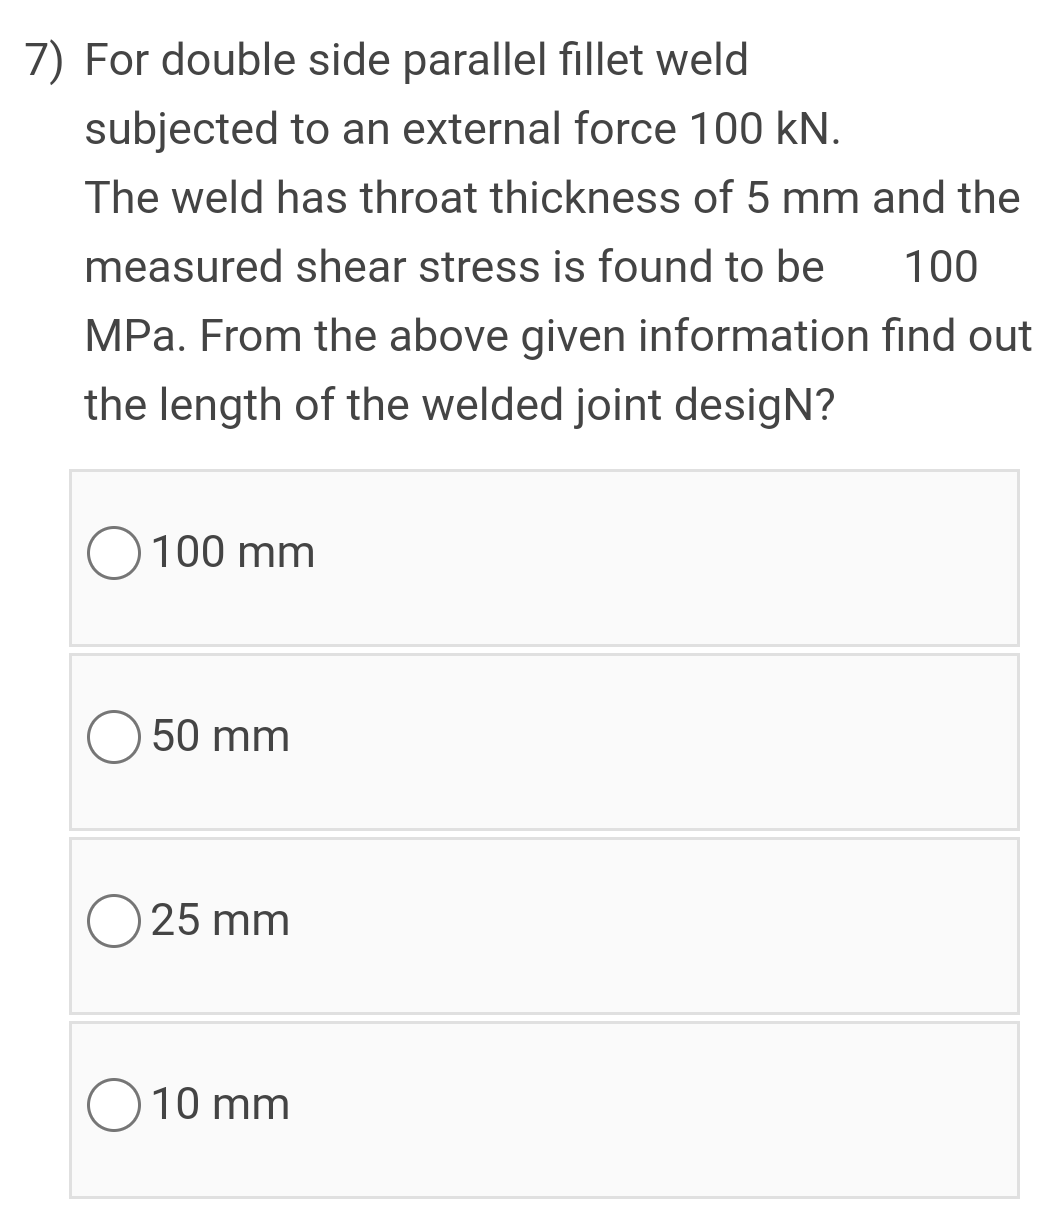 7) For double side parallel fillet weld
subjected to an external force 100 kN.
The weld has throat thickness of 5 mm and the
measured shear stress is found to be
100
MPa. From the above given information find out
the length of the welded joint desigN?
O 100 mm
50 mm
25 mm
10 mm
